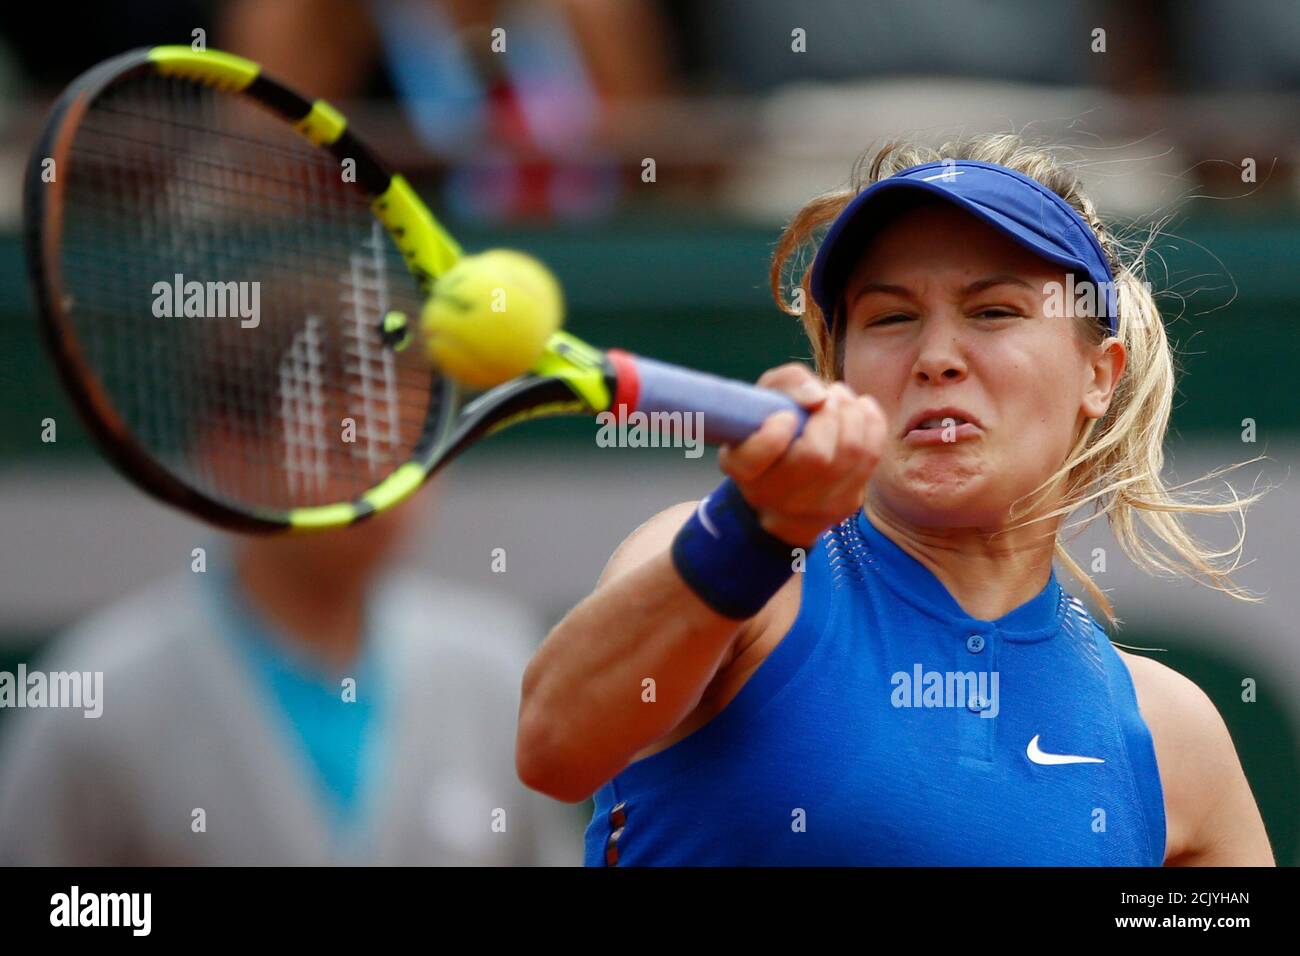 Tennis - French Open - Roland Garros - Eugenie Bouchard of Canada vs Timea  Bacsinszky of Switzerland - Paris, France - 26/05/16. Eugenie Bouchard  returns the ball. REUTERS/Pascal Rossignol Stock Photo - Alamy